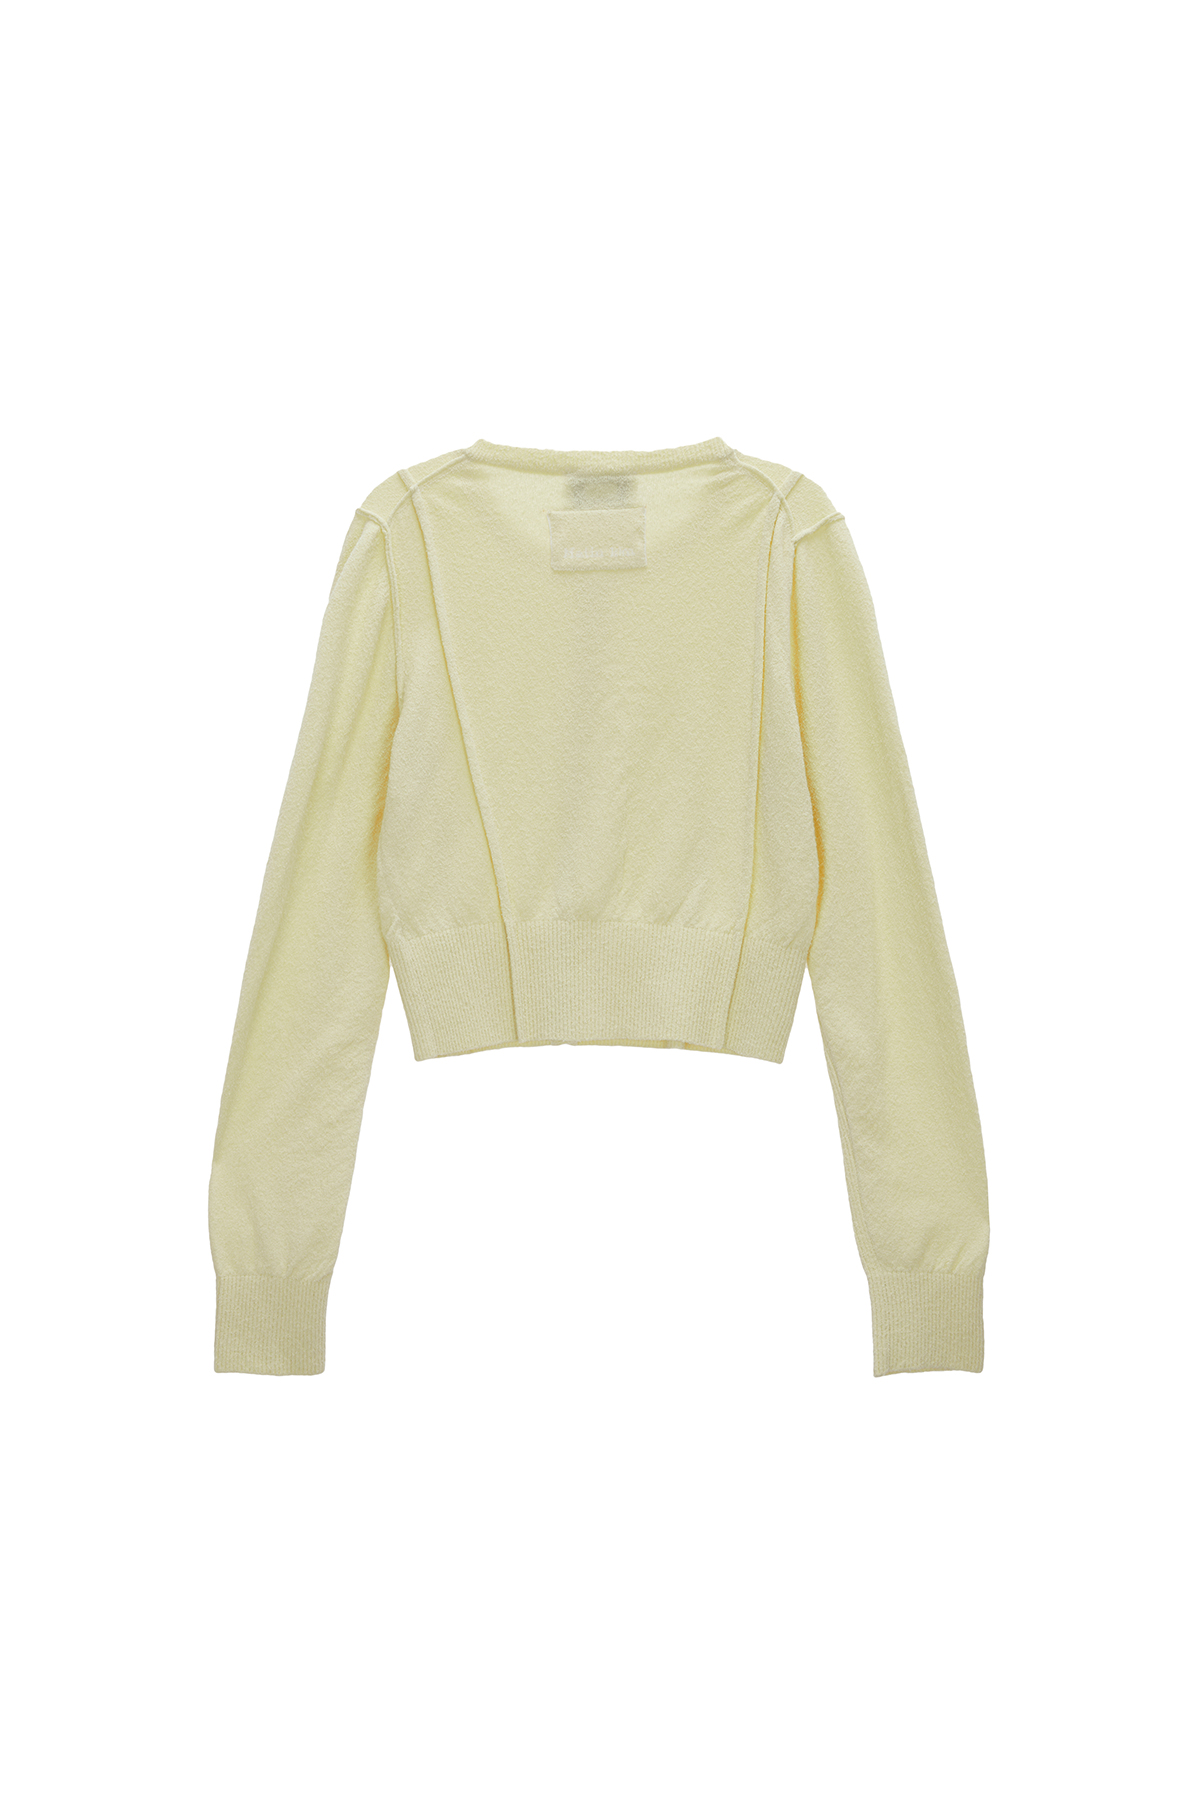 PINTUCK POINT KNIT CARDIGAN IN LIGHT YELLOW